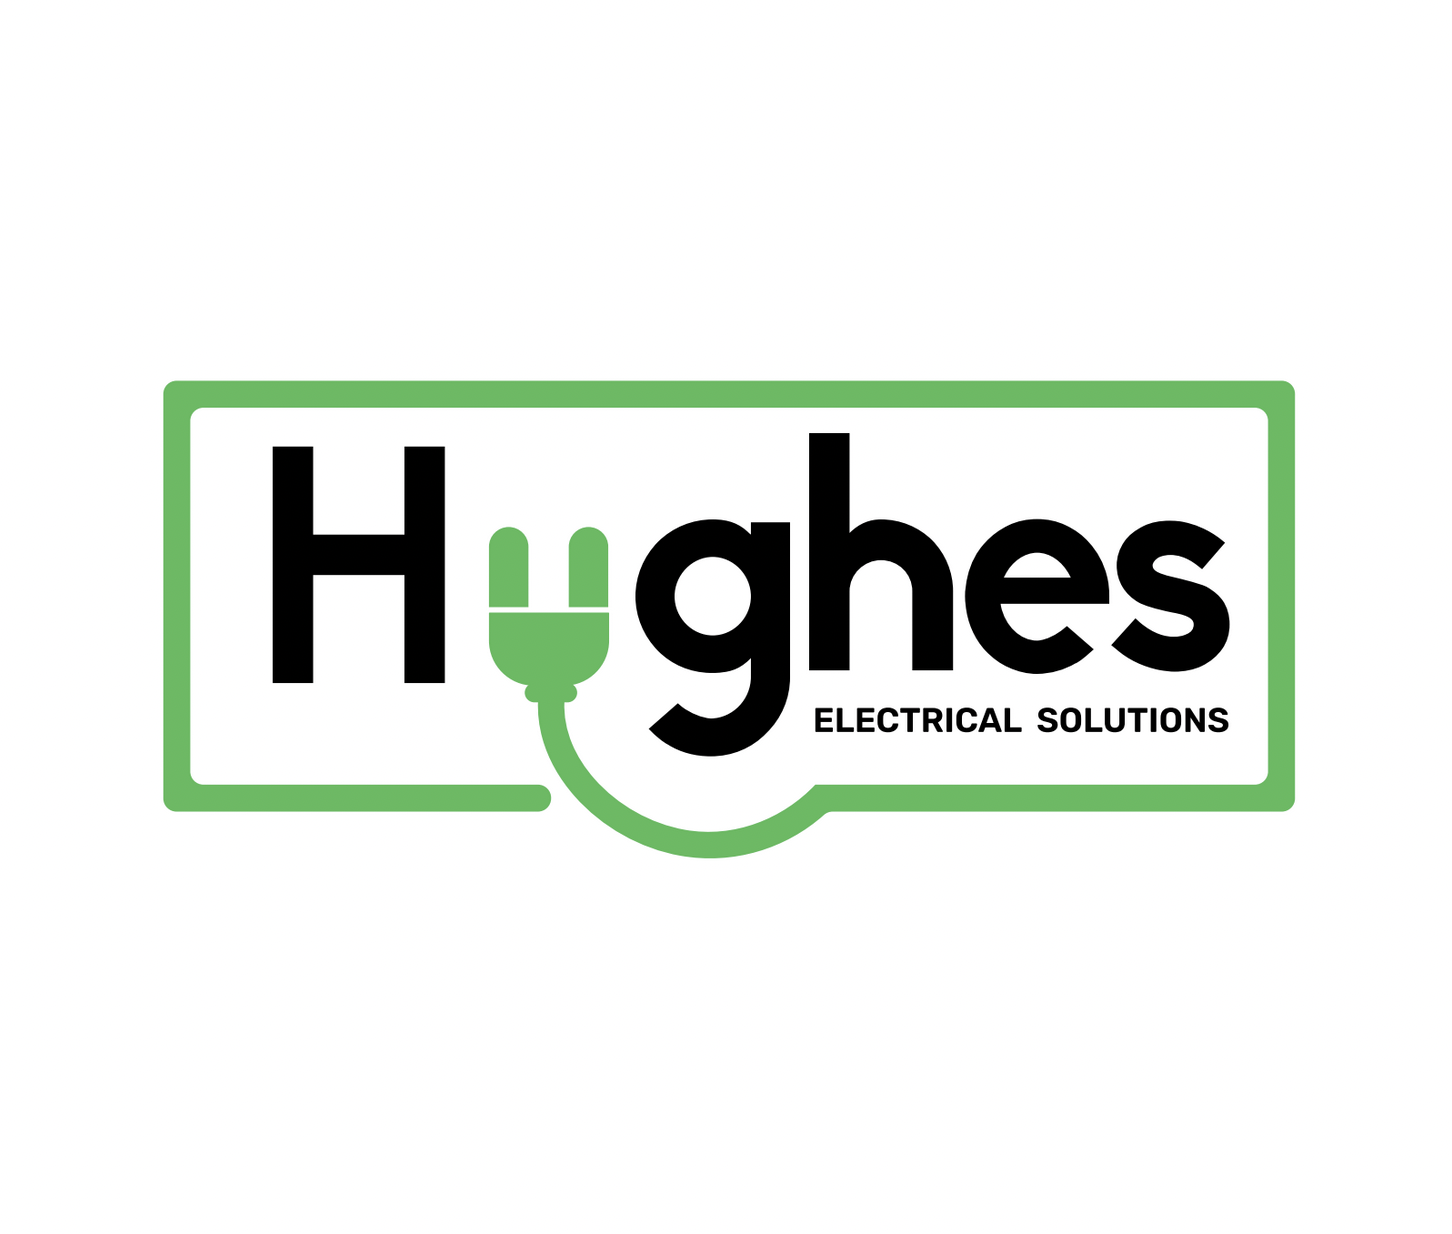 Hughes Electrical Solutions